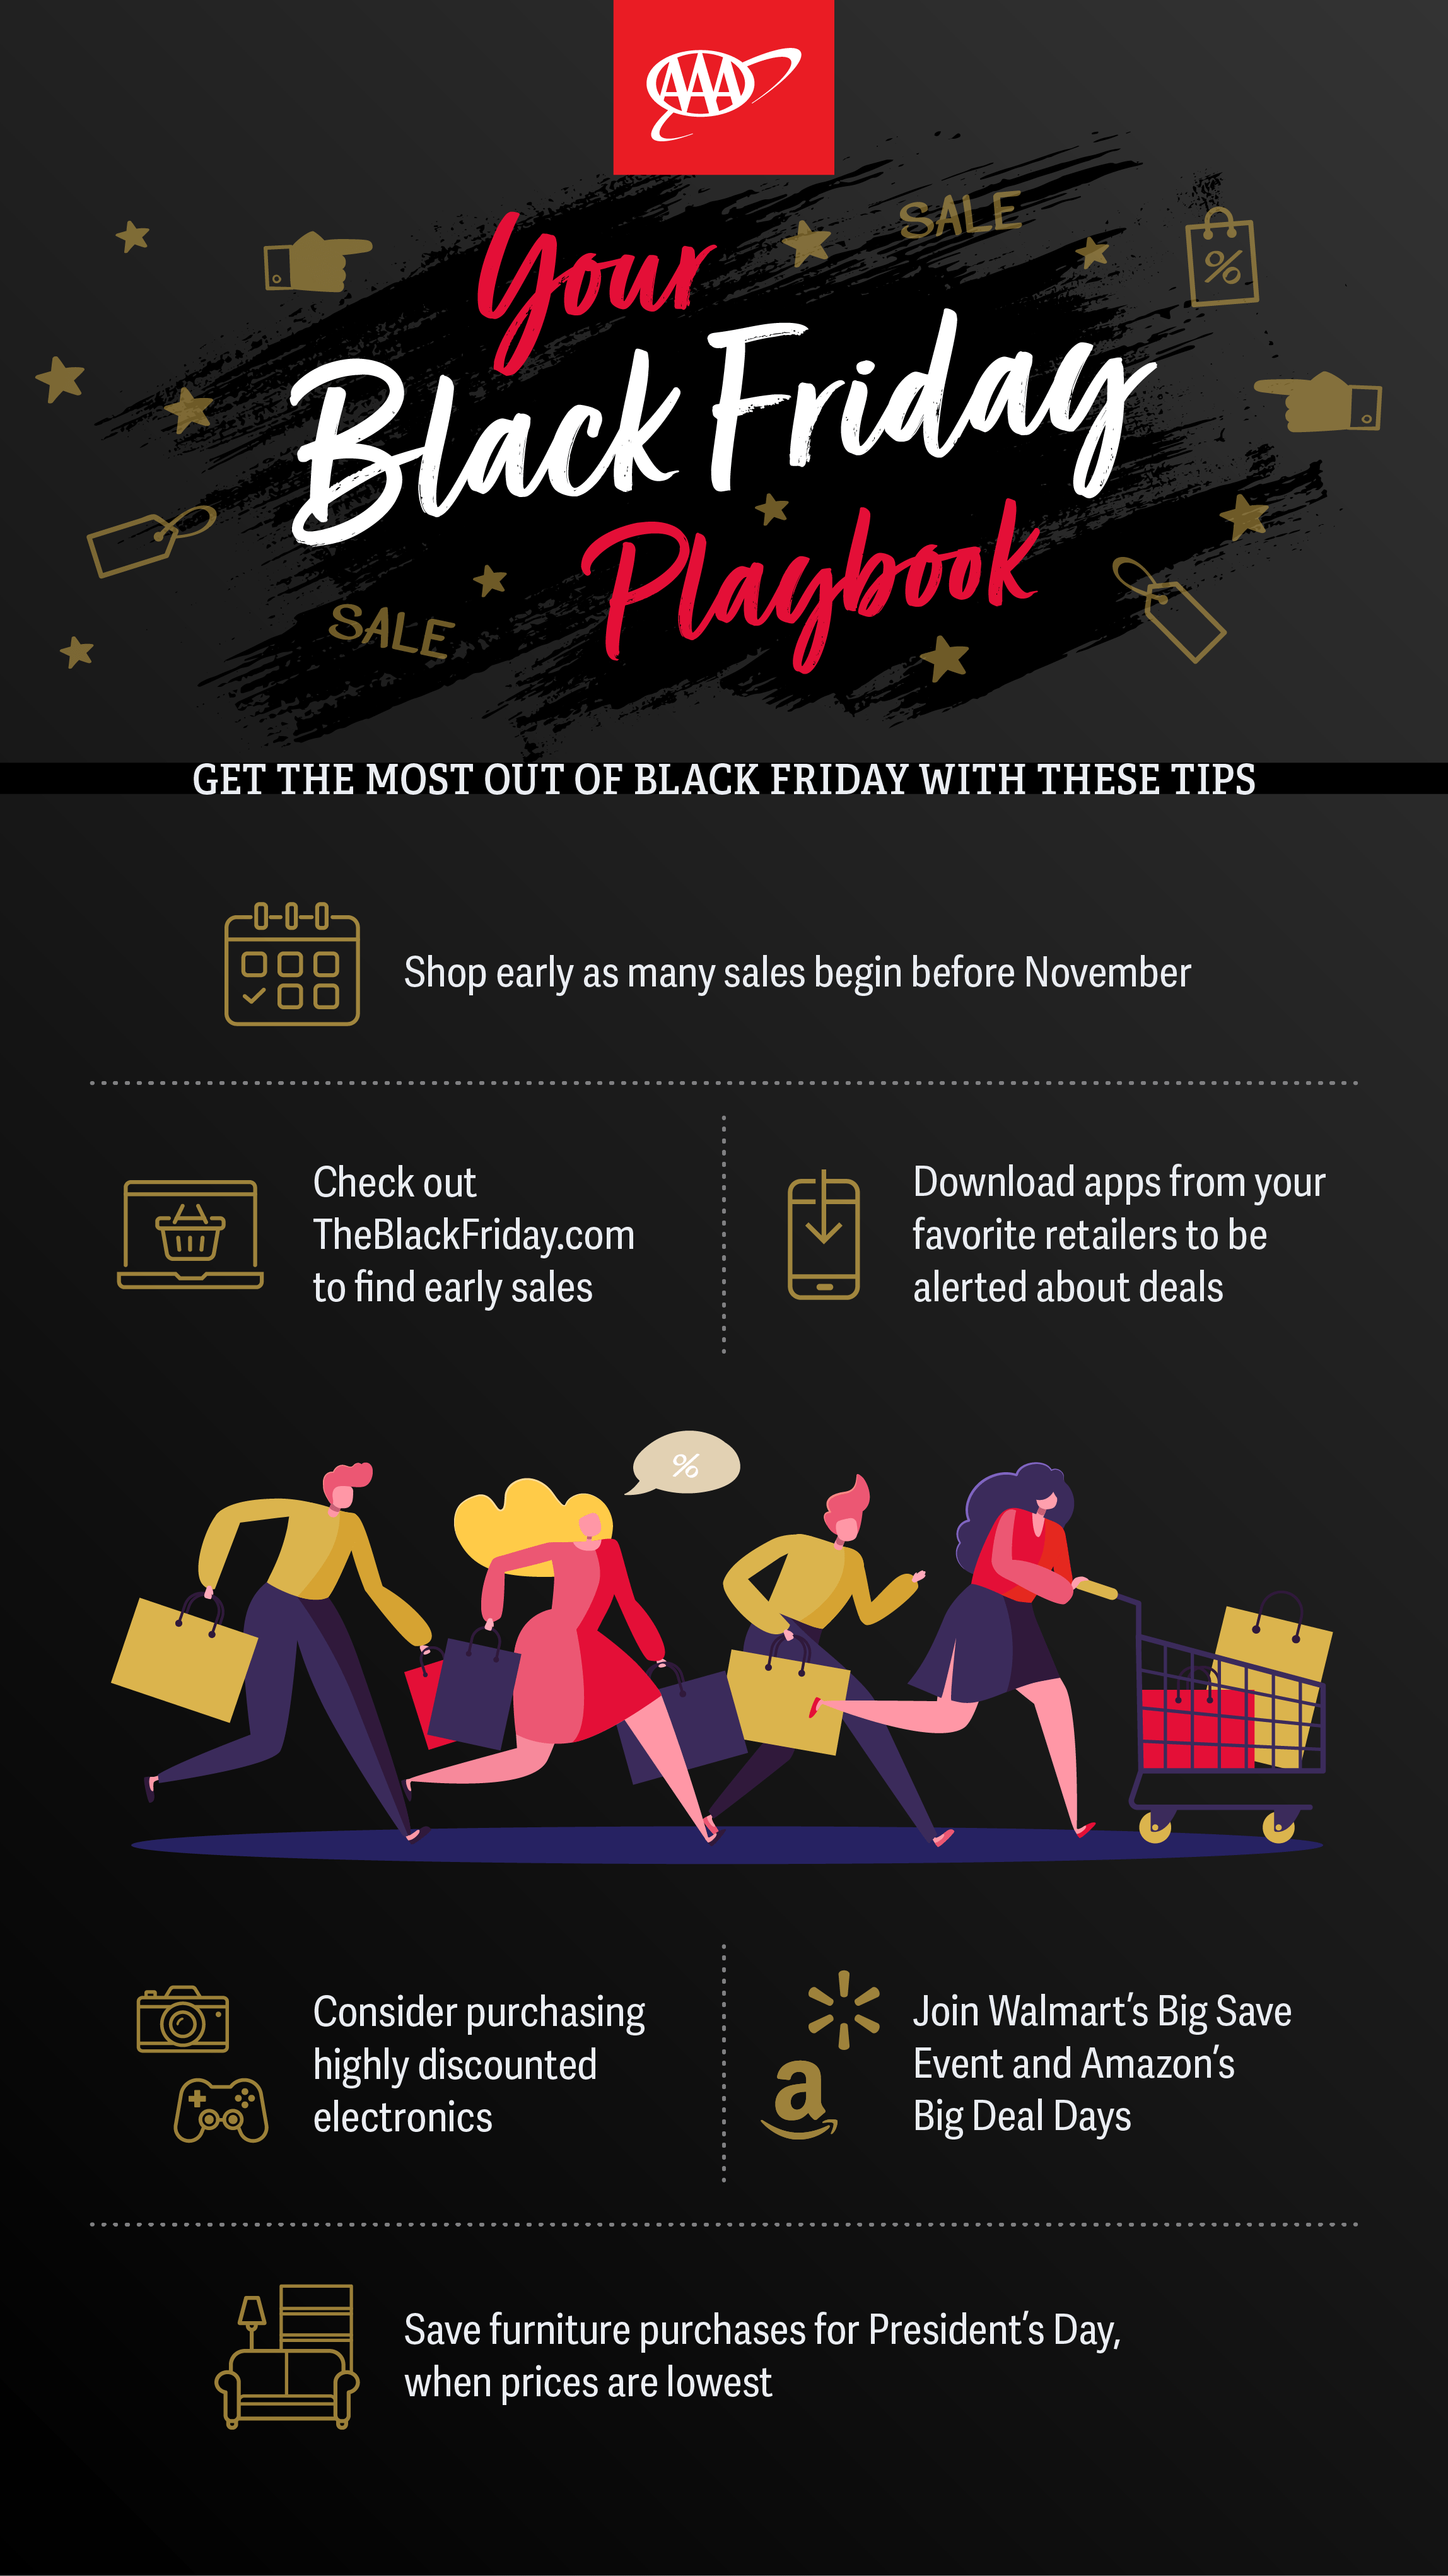 Black Friday shopping guide infographic